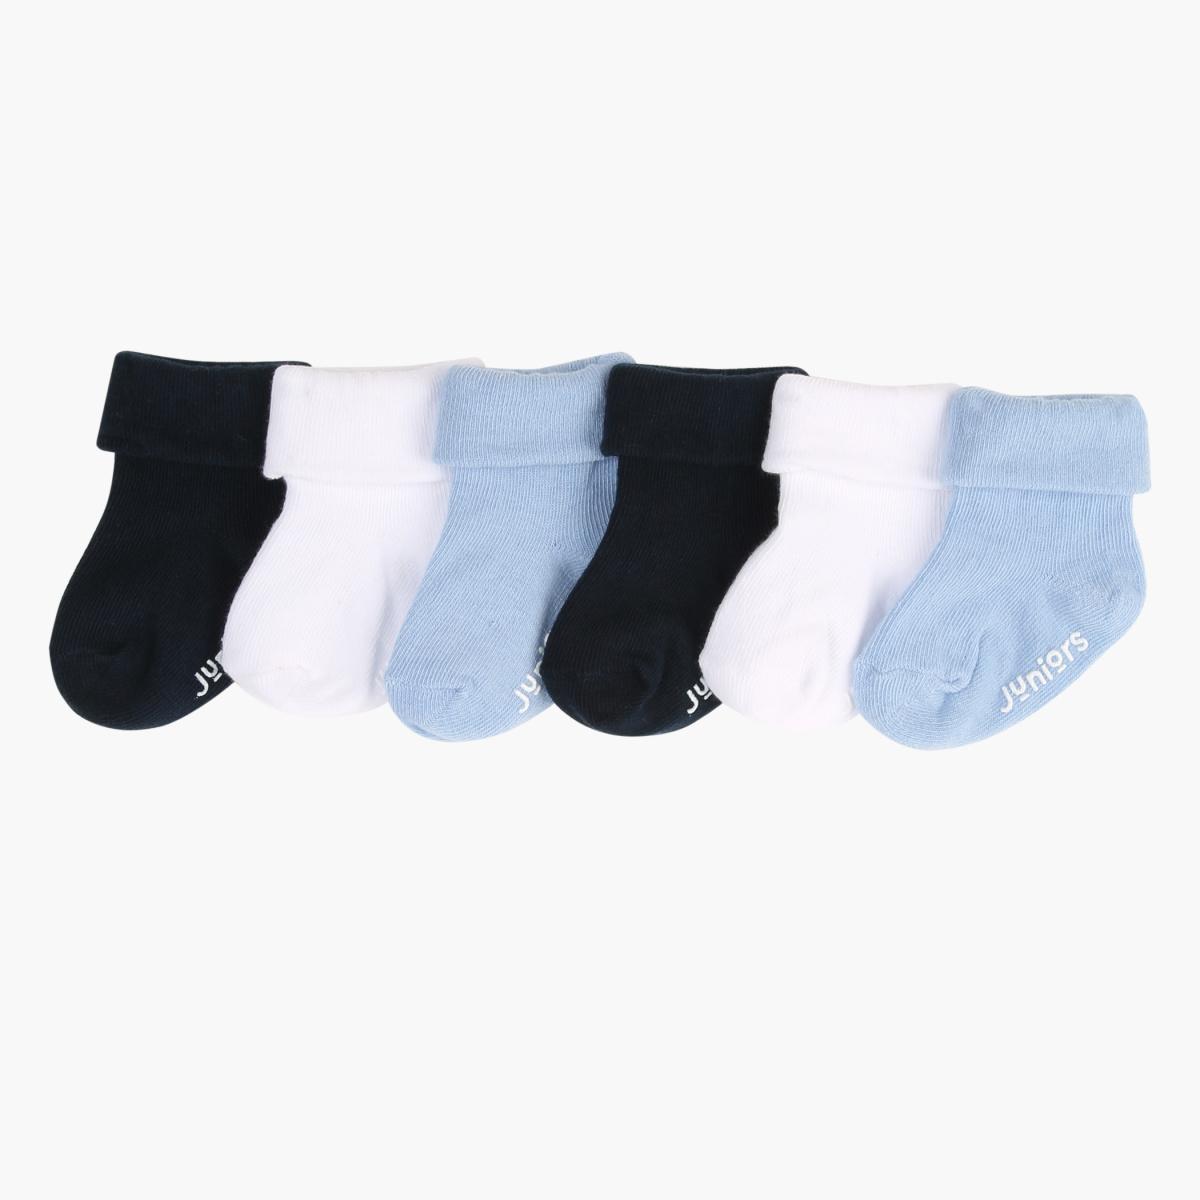 Juniors Ribbed Socks with Roll Down Cuff - Set of 6